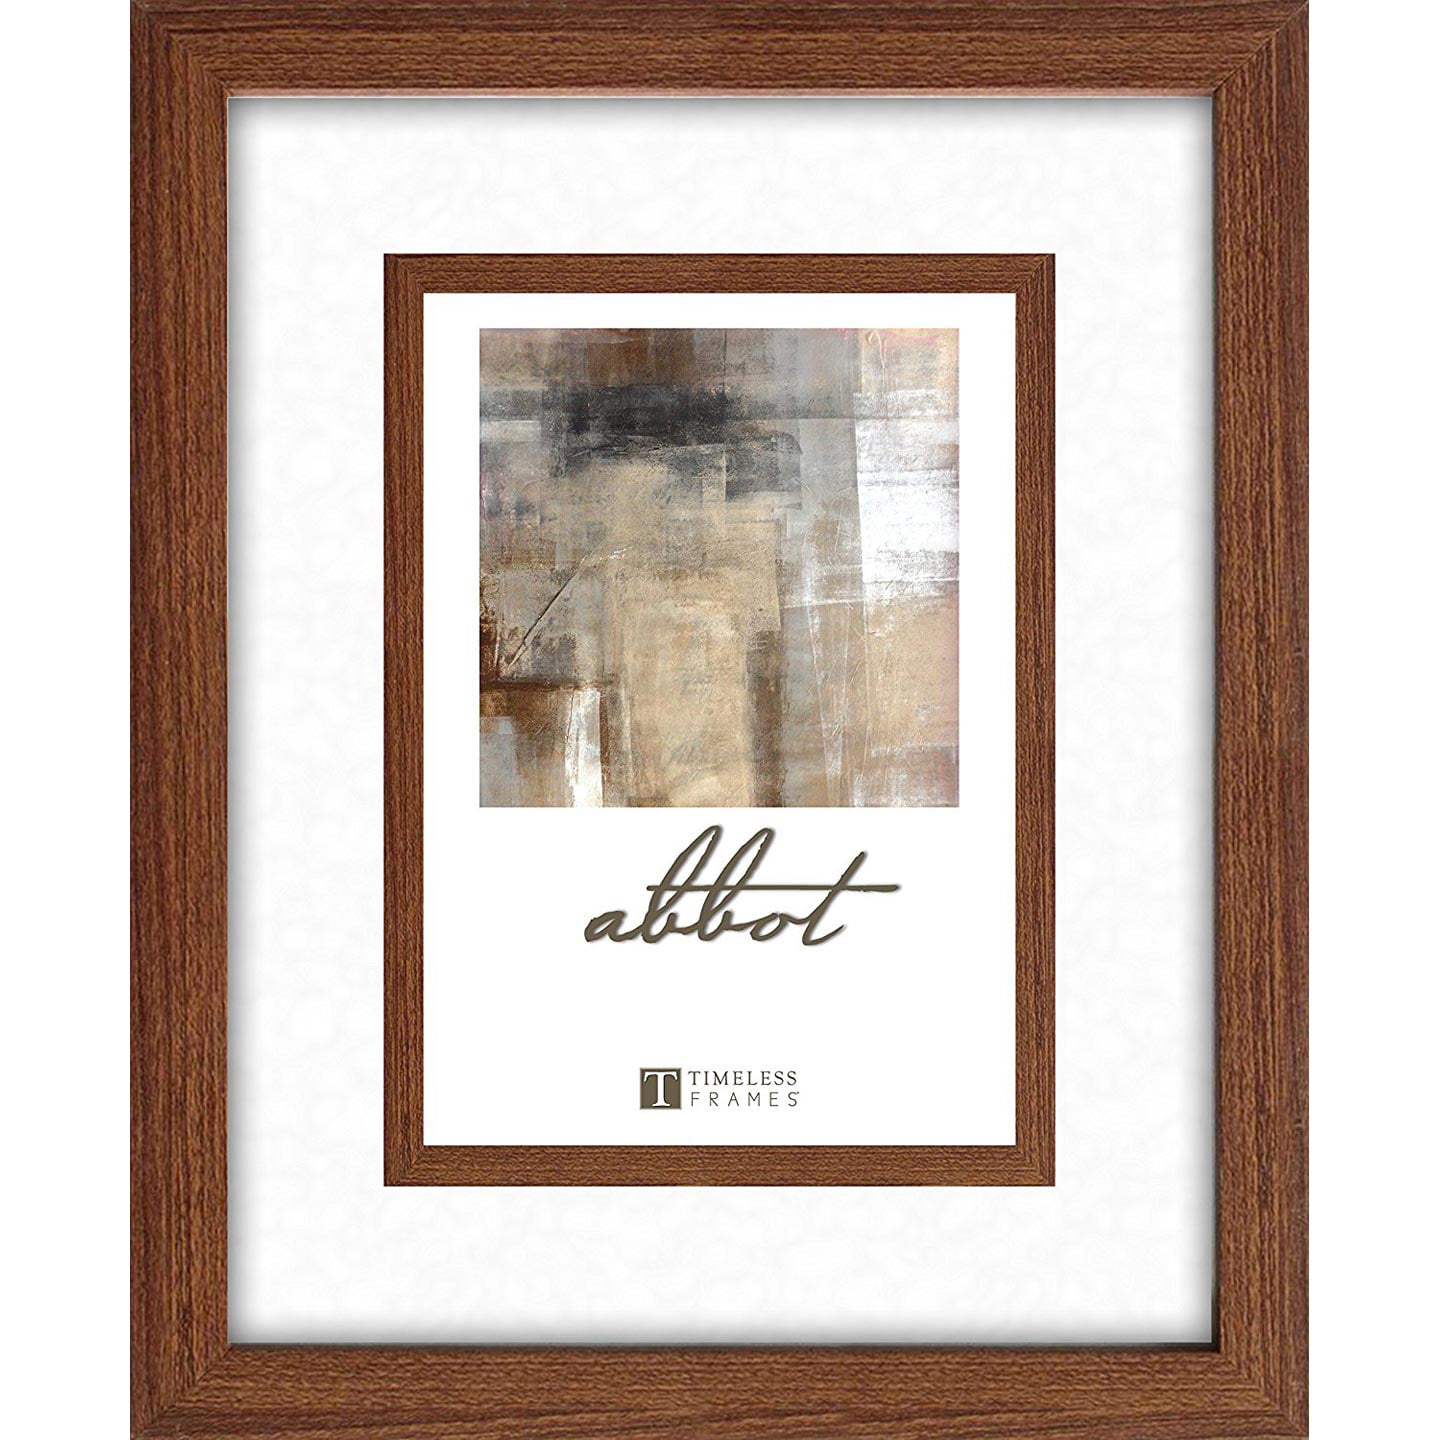 Details about   19x13 Brown Barnwood Picture Frame With Acrylic Front and Foam Board Backing 